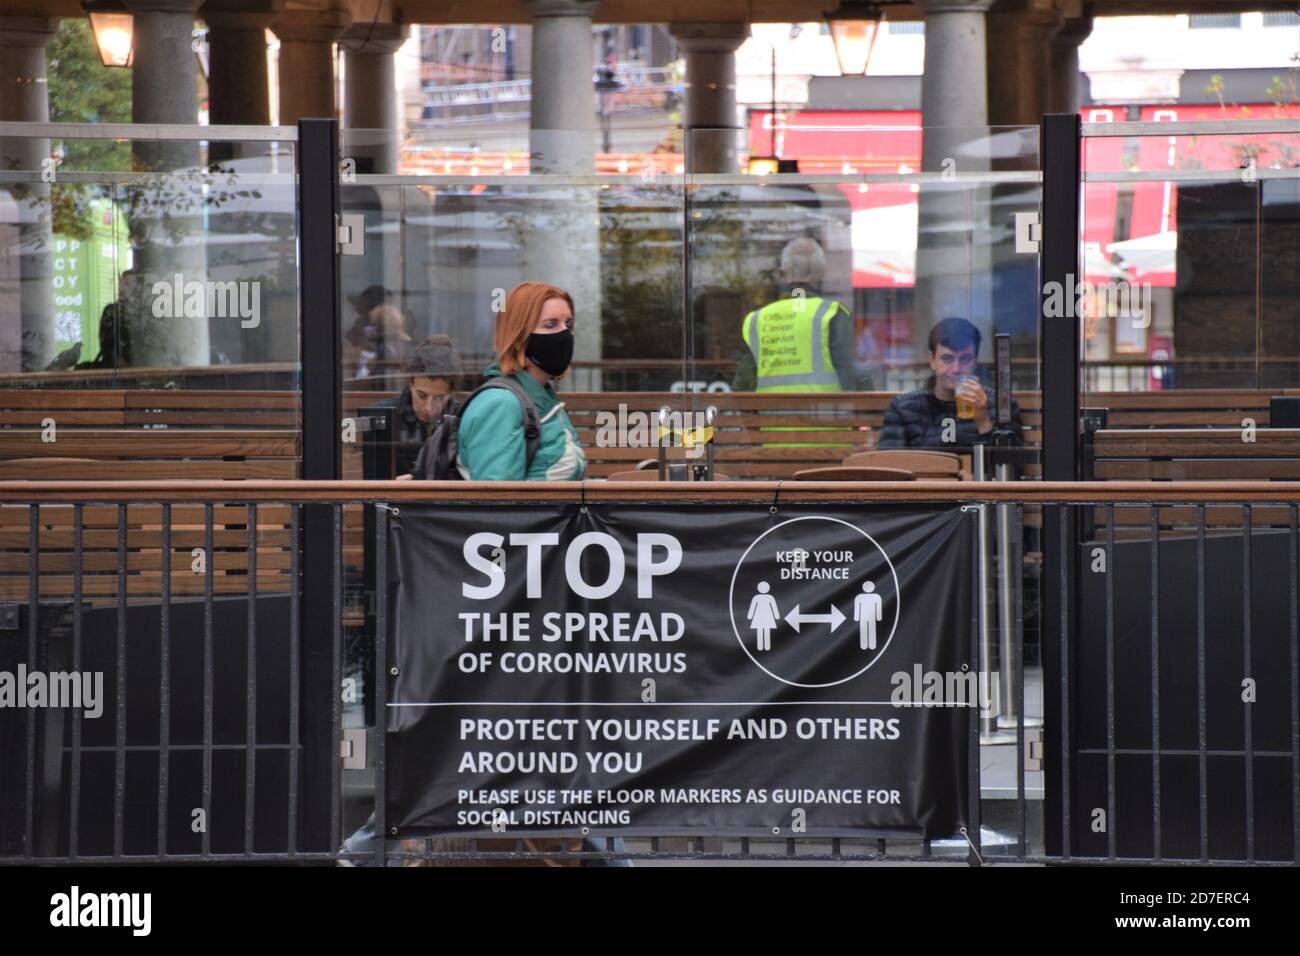 A woman with a face mask walks past a Stop The Spread Of Coronavirus sign at Covent Garden Market. London, United Kingdom 2020. Stock Photo